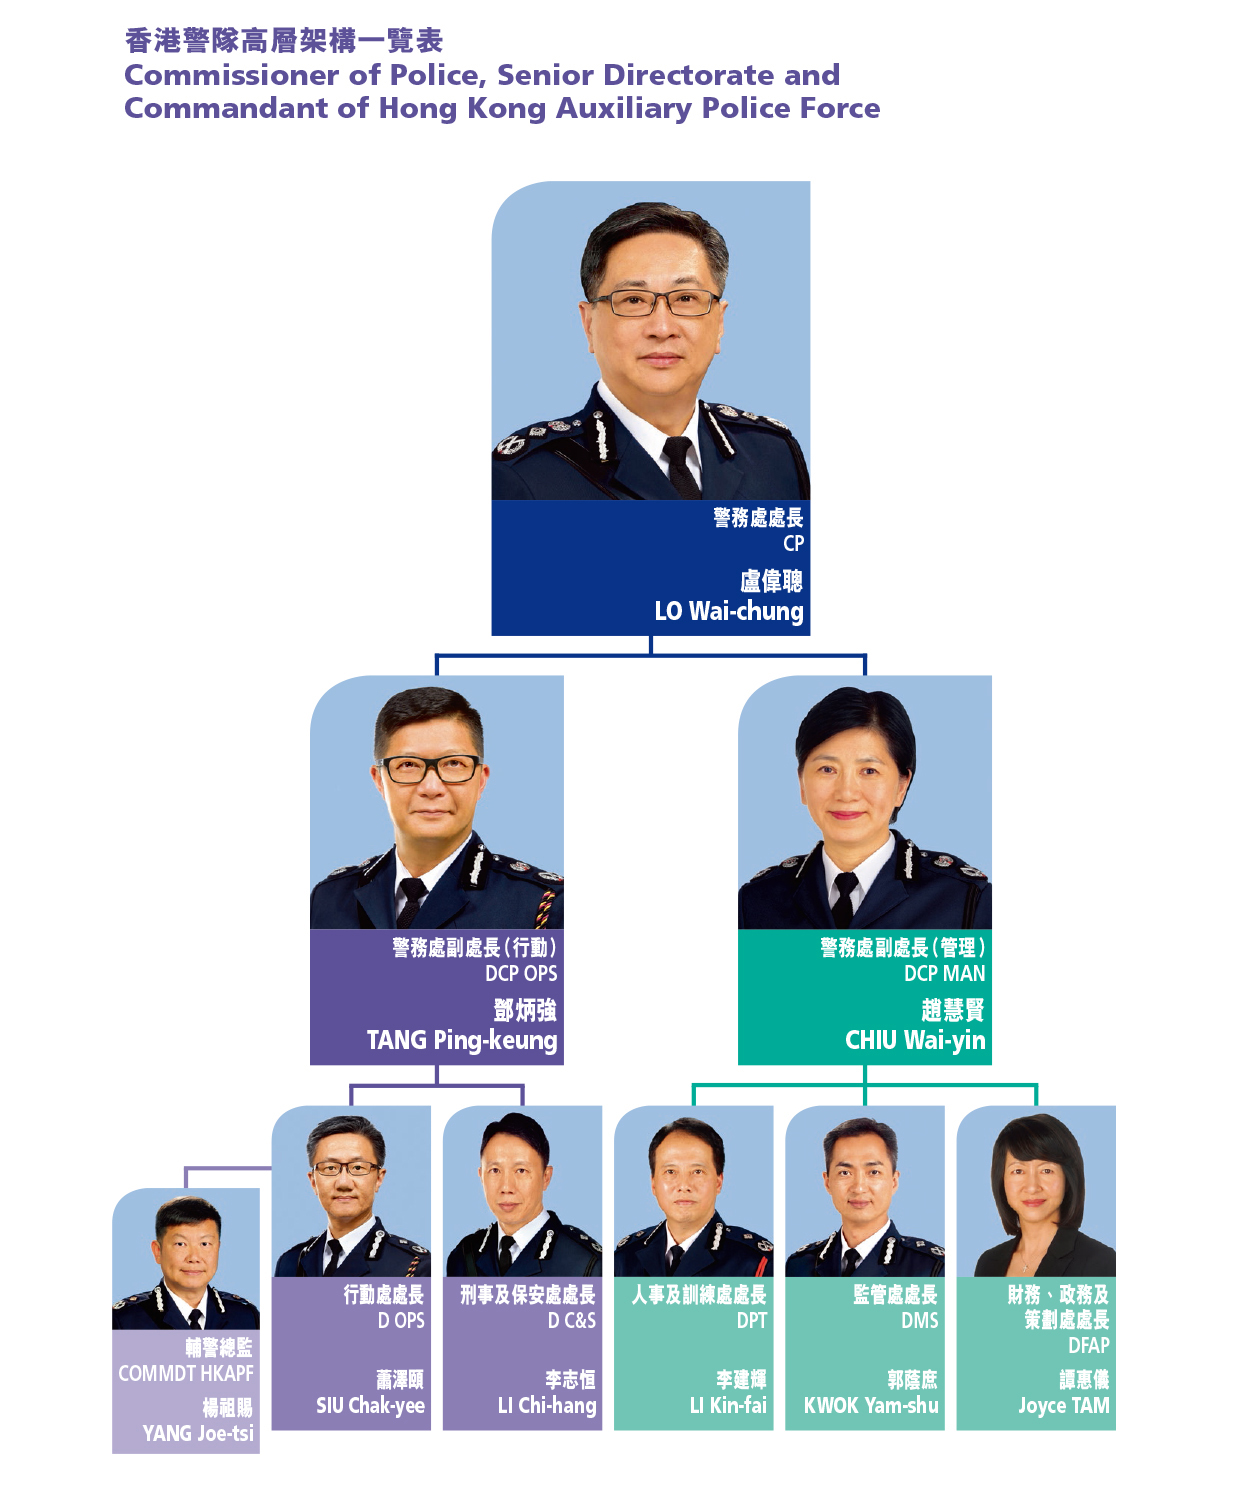 Commissioner of Police, Senior Directorate and Commandant of Hong Kong Auxiliary Police Force